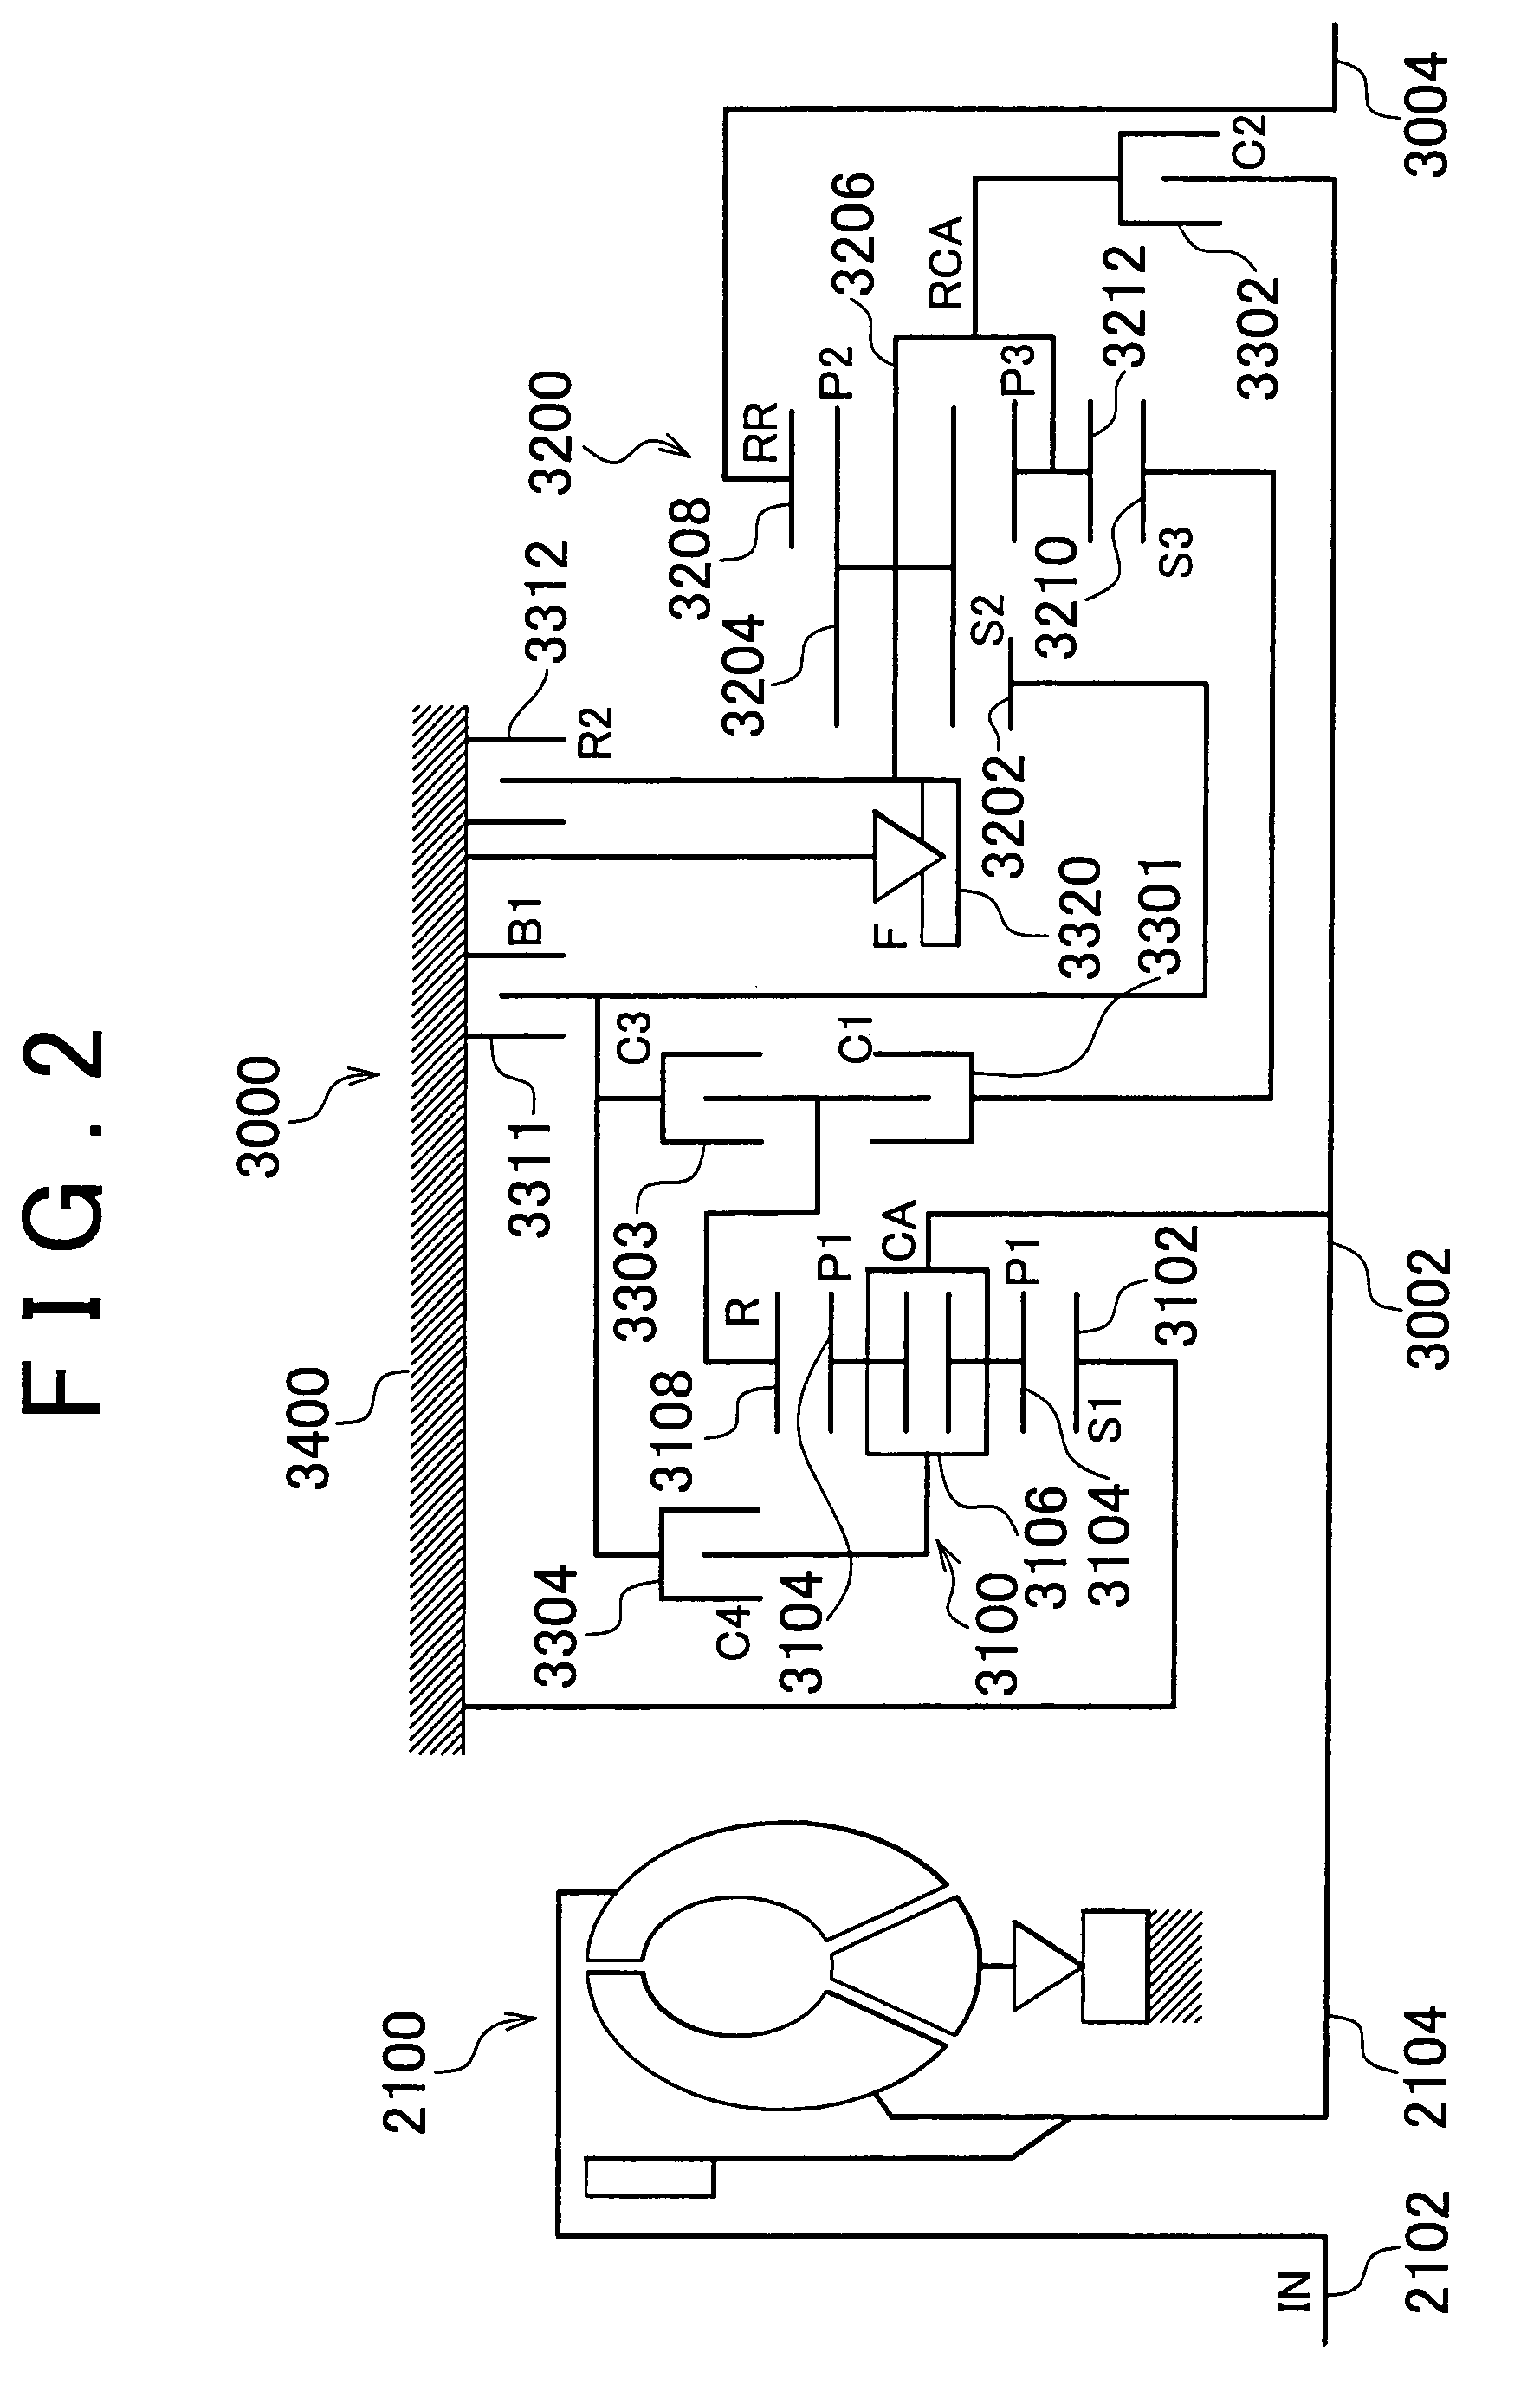 Apparatus for and method of controlling power train, and storage medium storing program for implementing the method